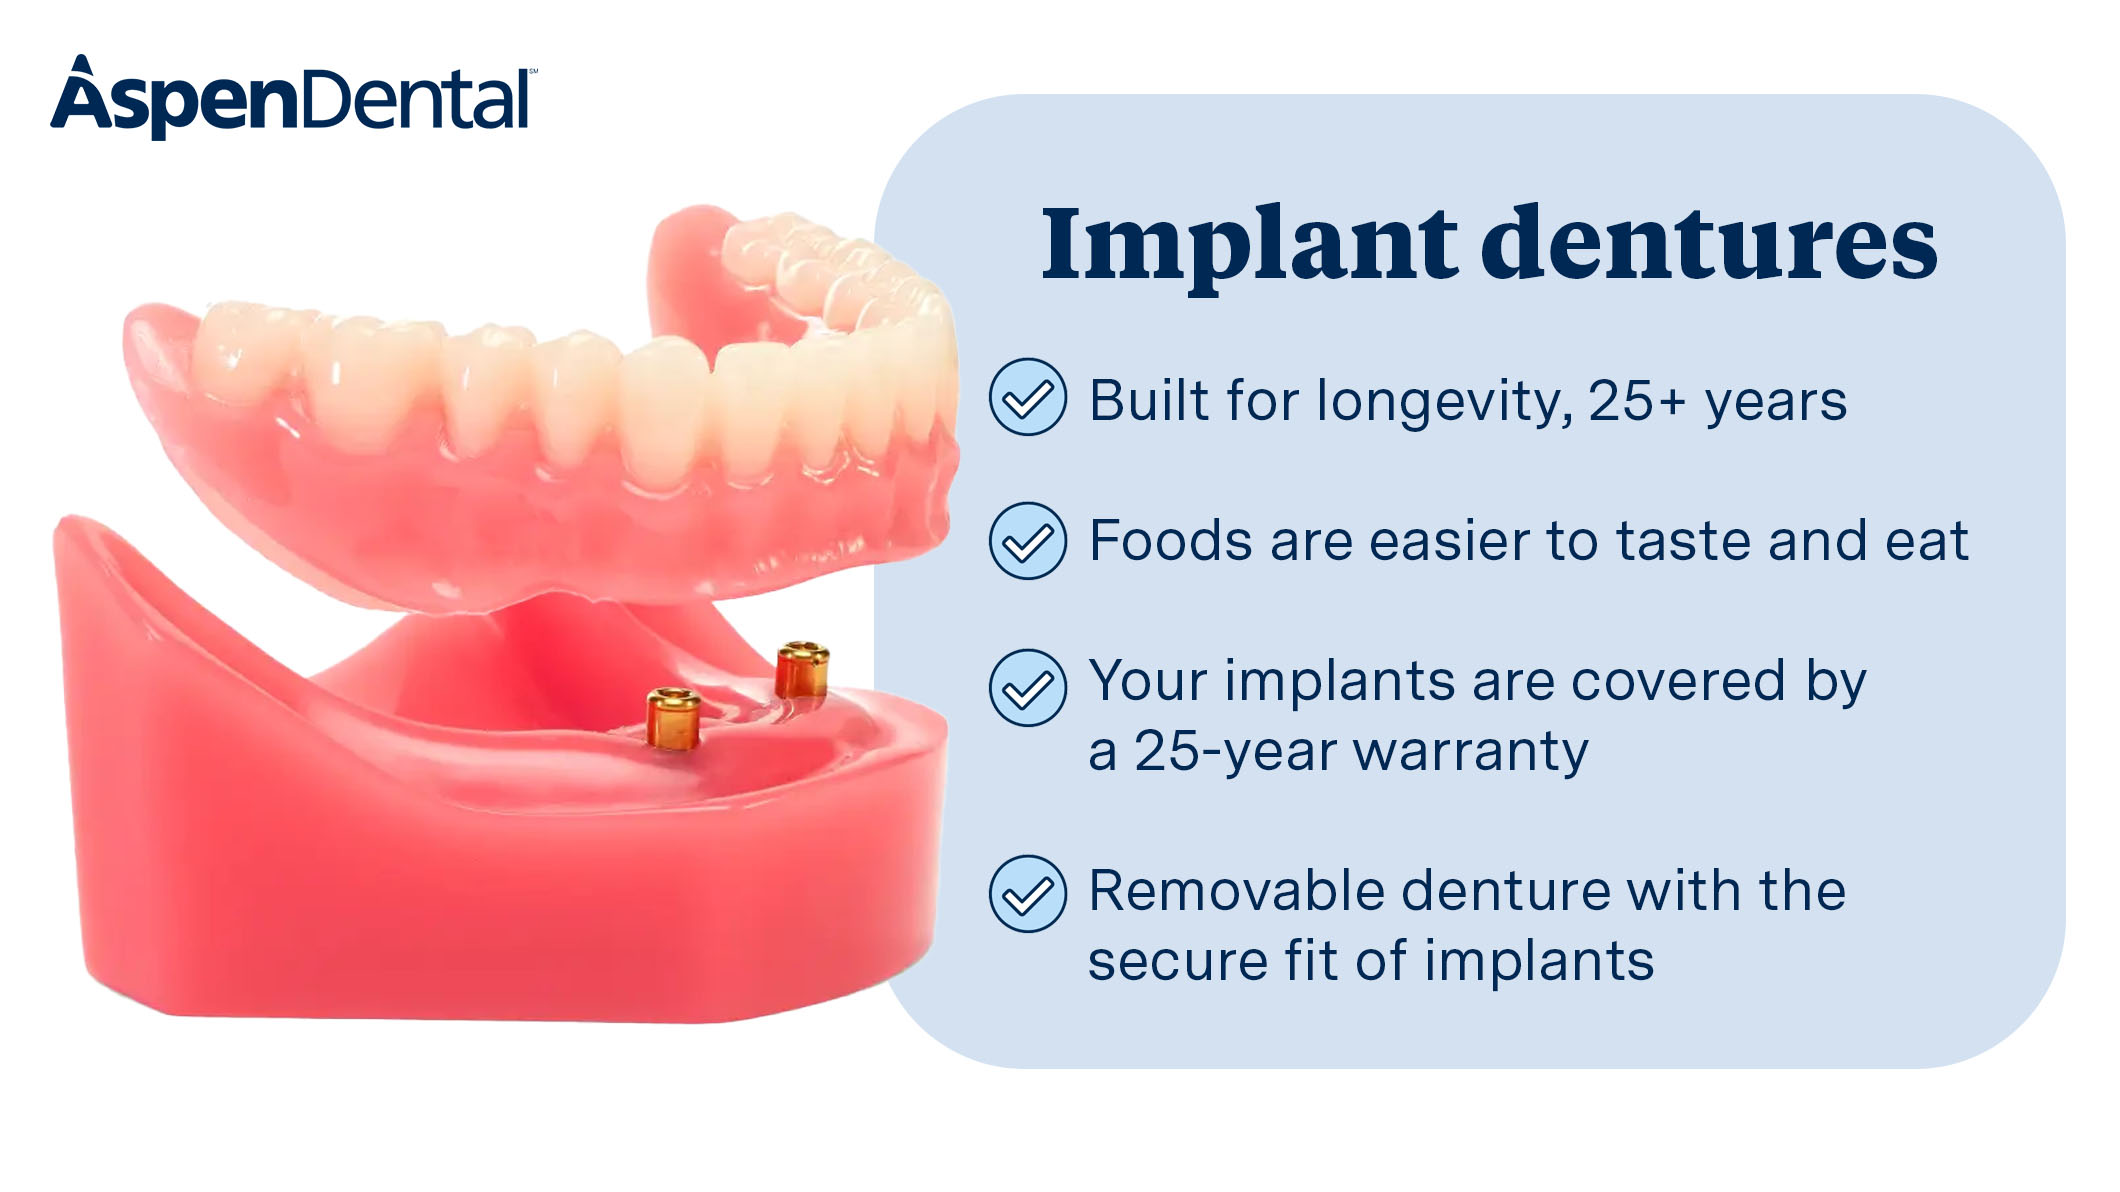 Our implant dentures offer a natural feel and titanium-stabilized security. Easily snaps into place with surgical precision for a confident smile that can last for 25+ years.